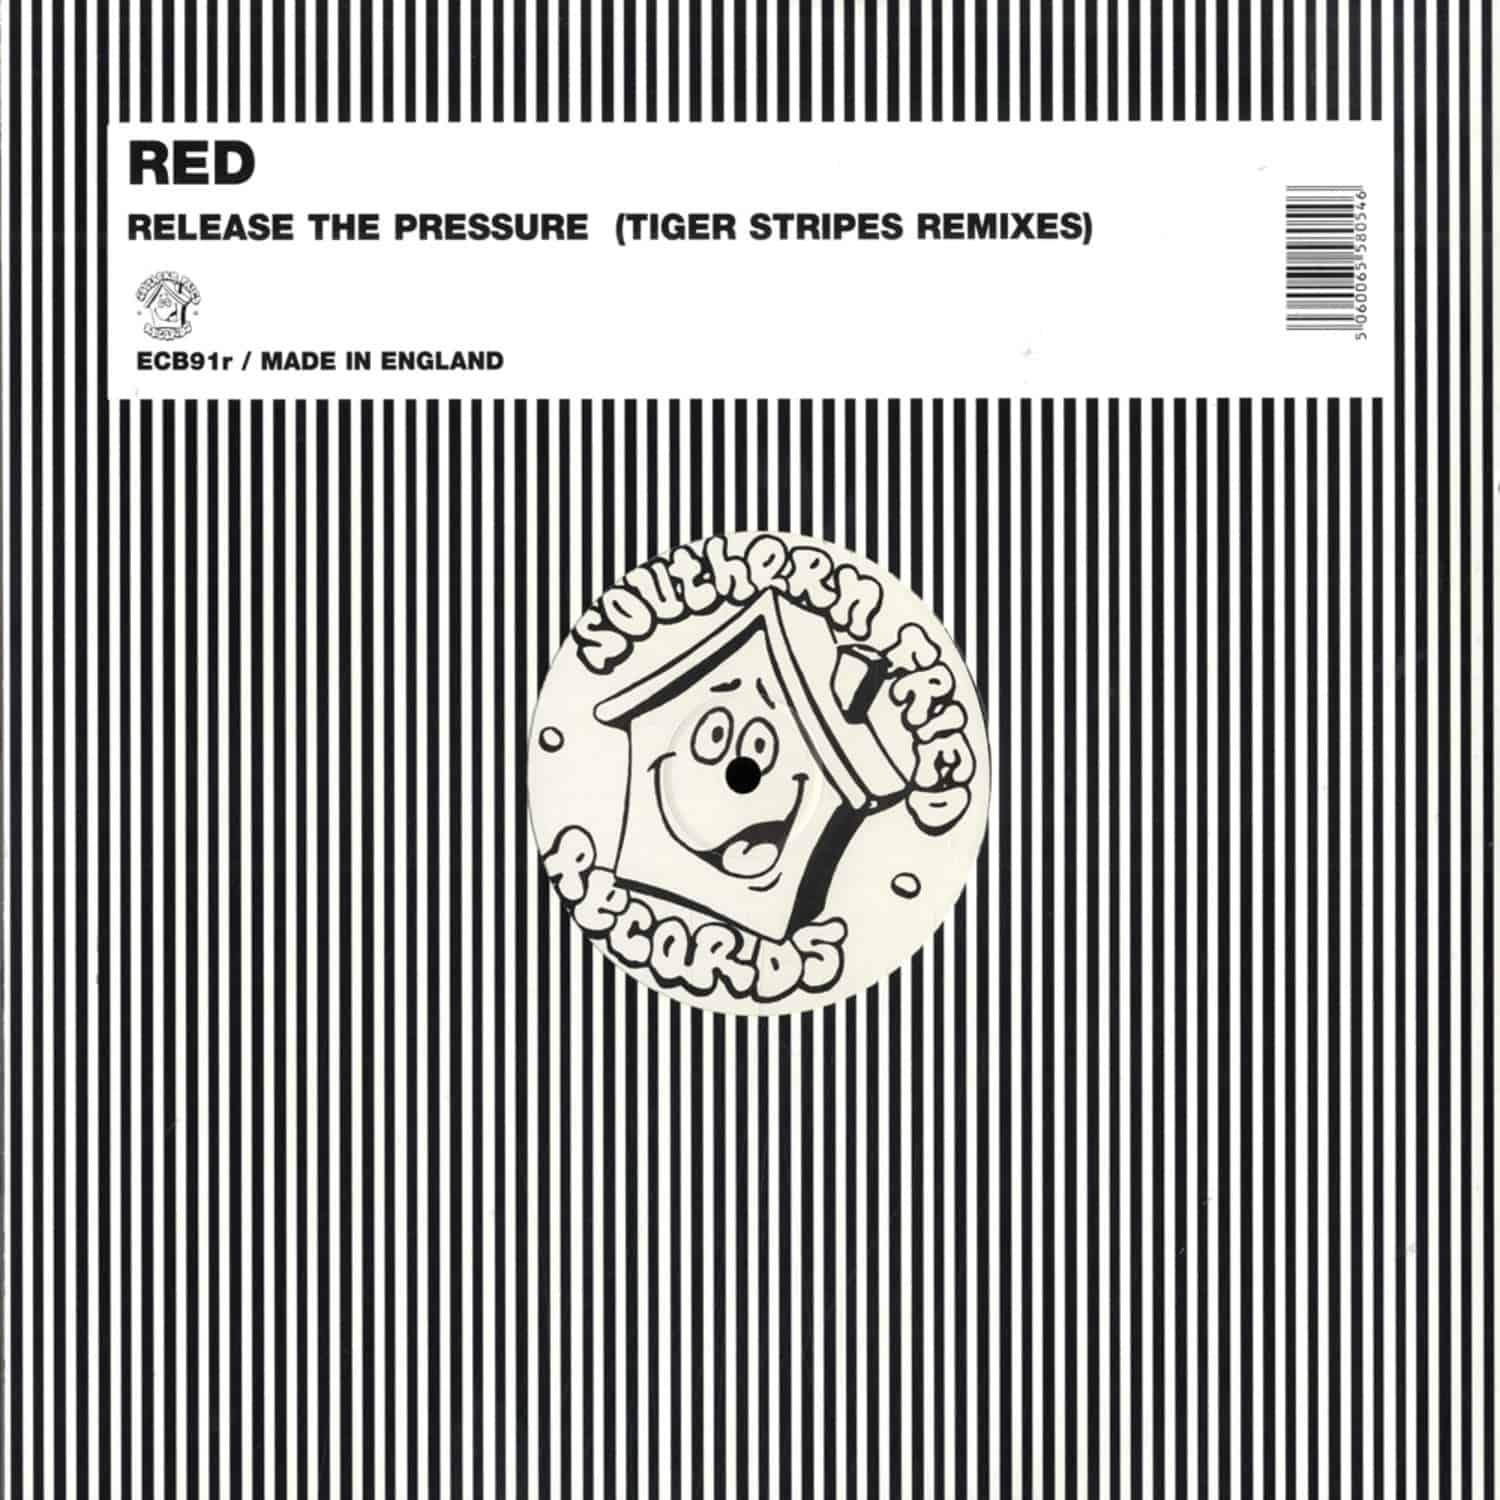 Red - RELEASE THE PRESSURE RMX